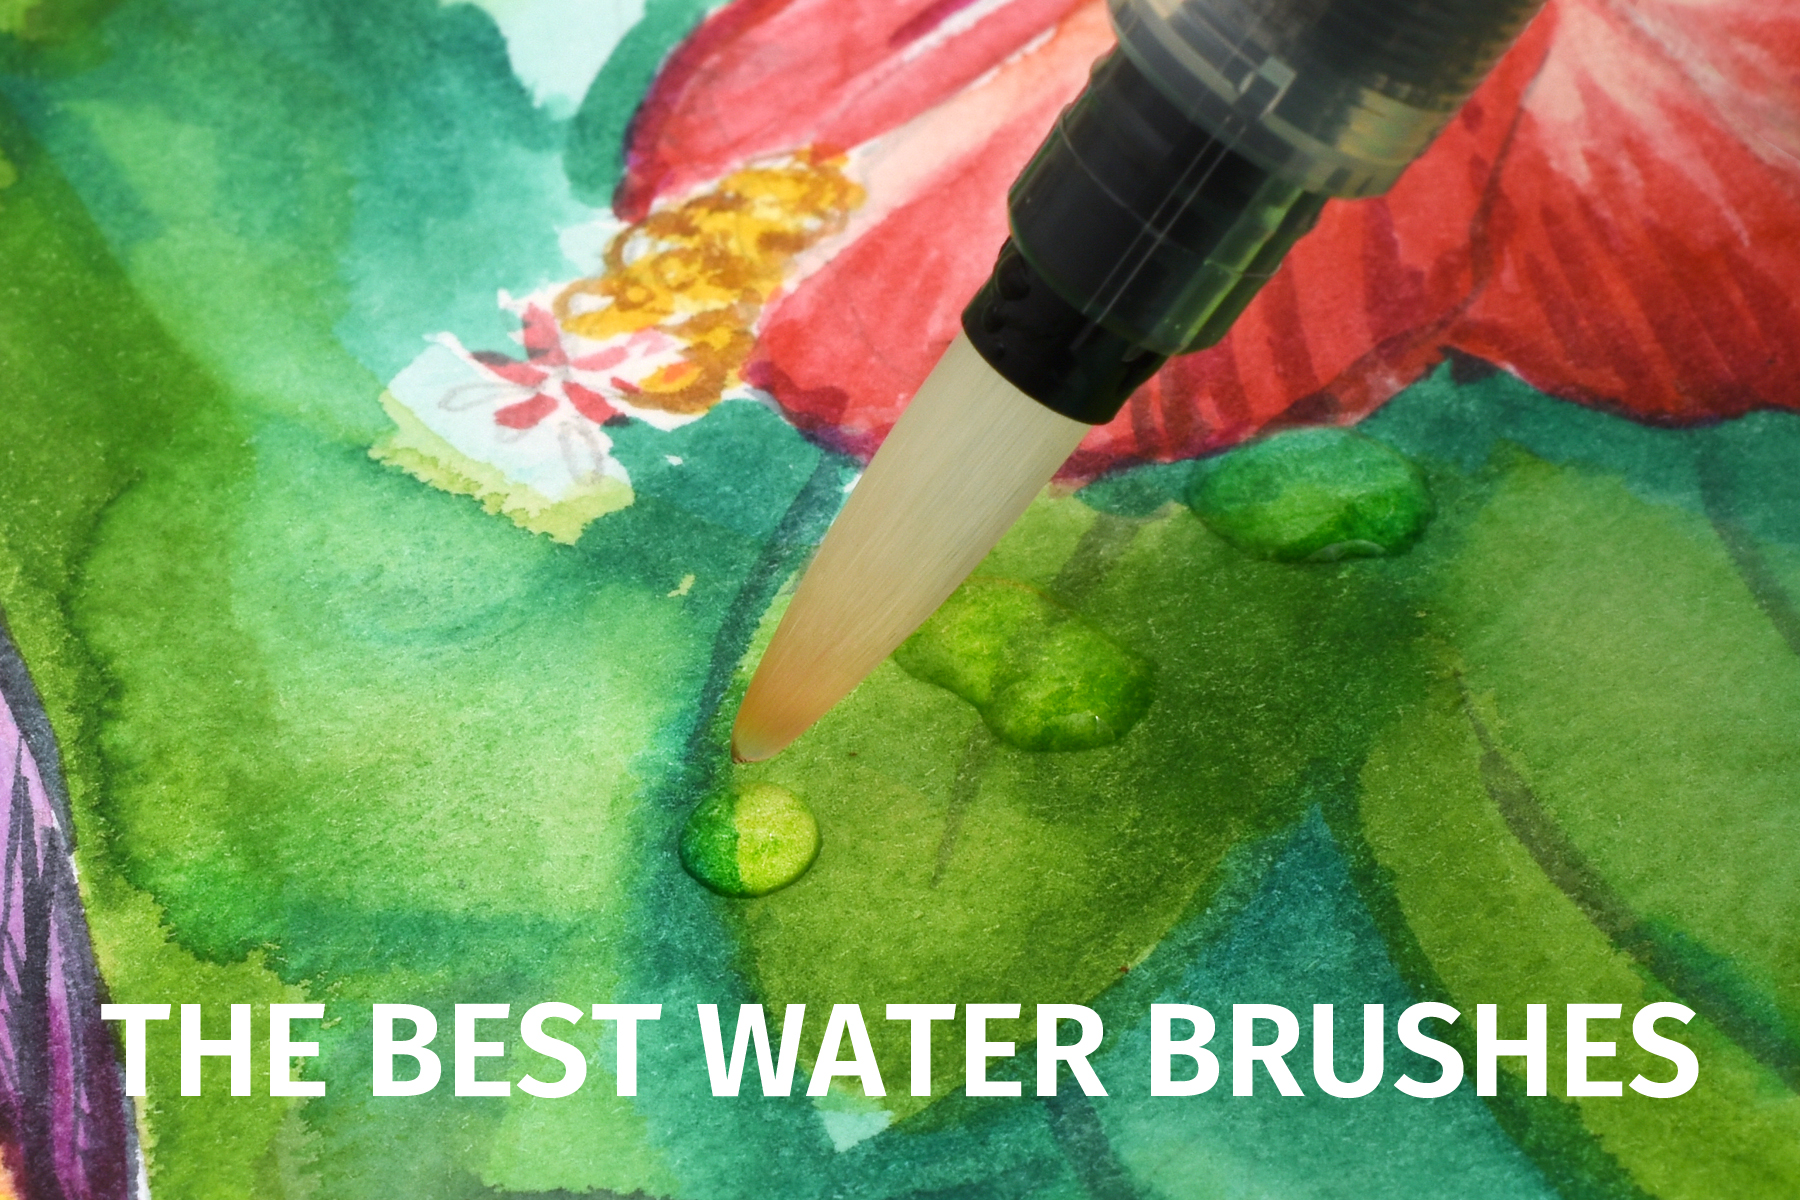 The Best Water Brushes